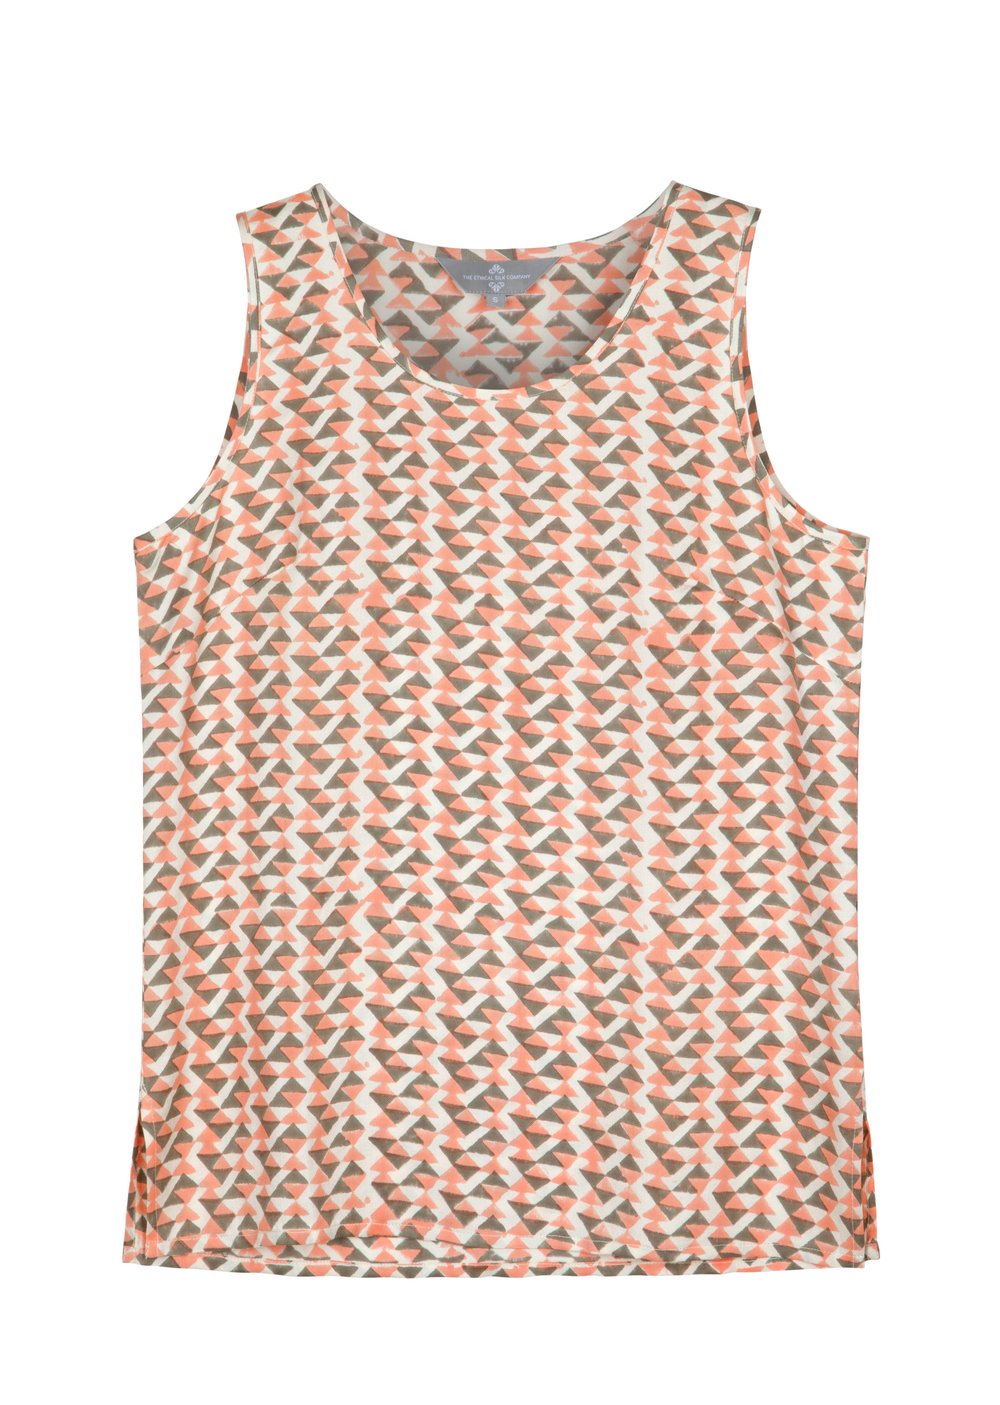 Mulberry Silk Top - Coral/Grey print